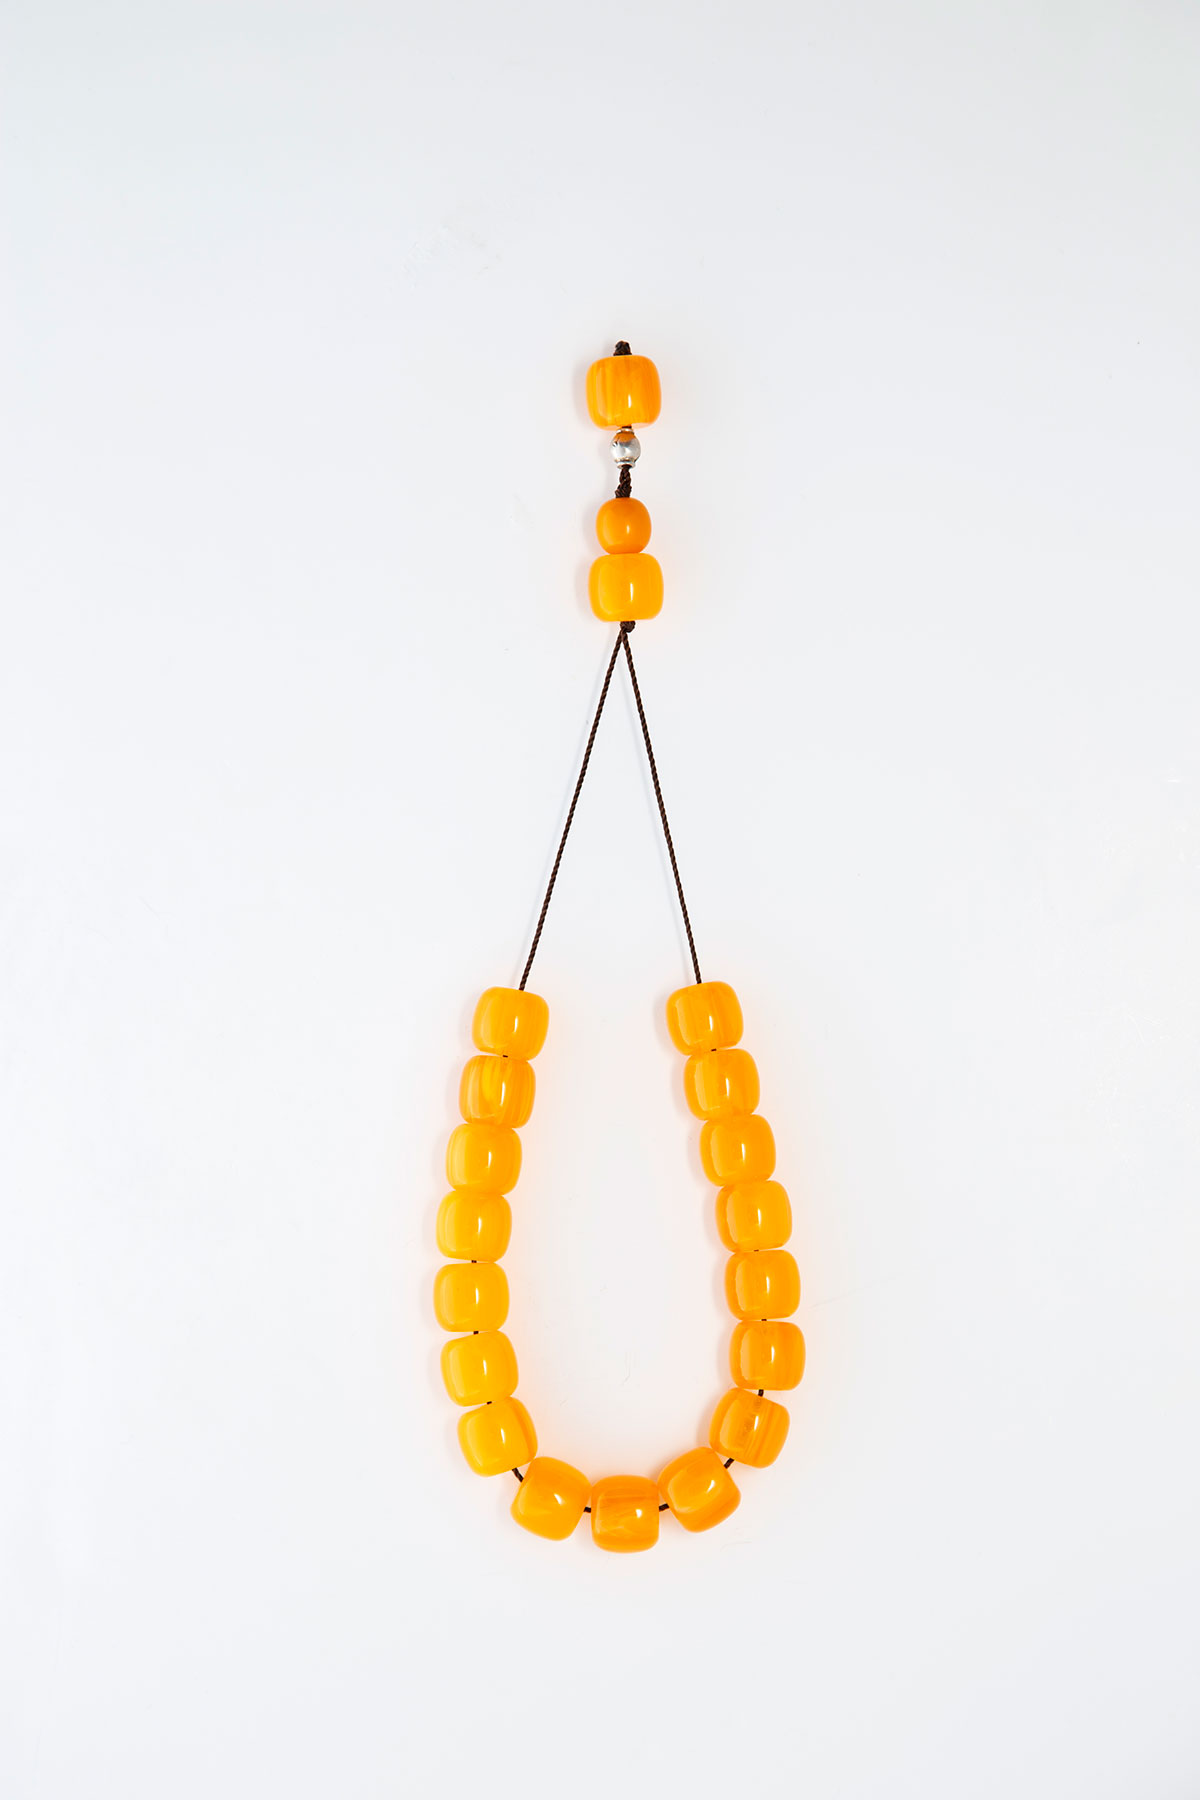 Artificial resin  (Orange  with water-like shades)